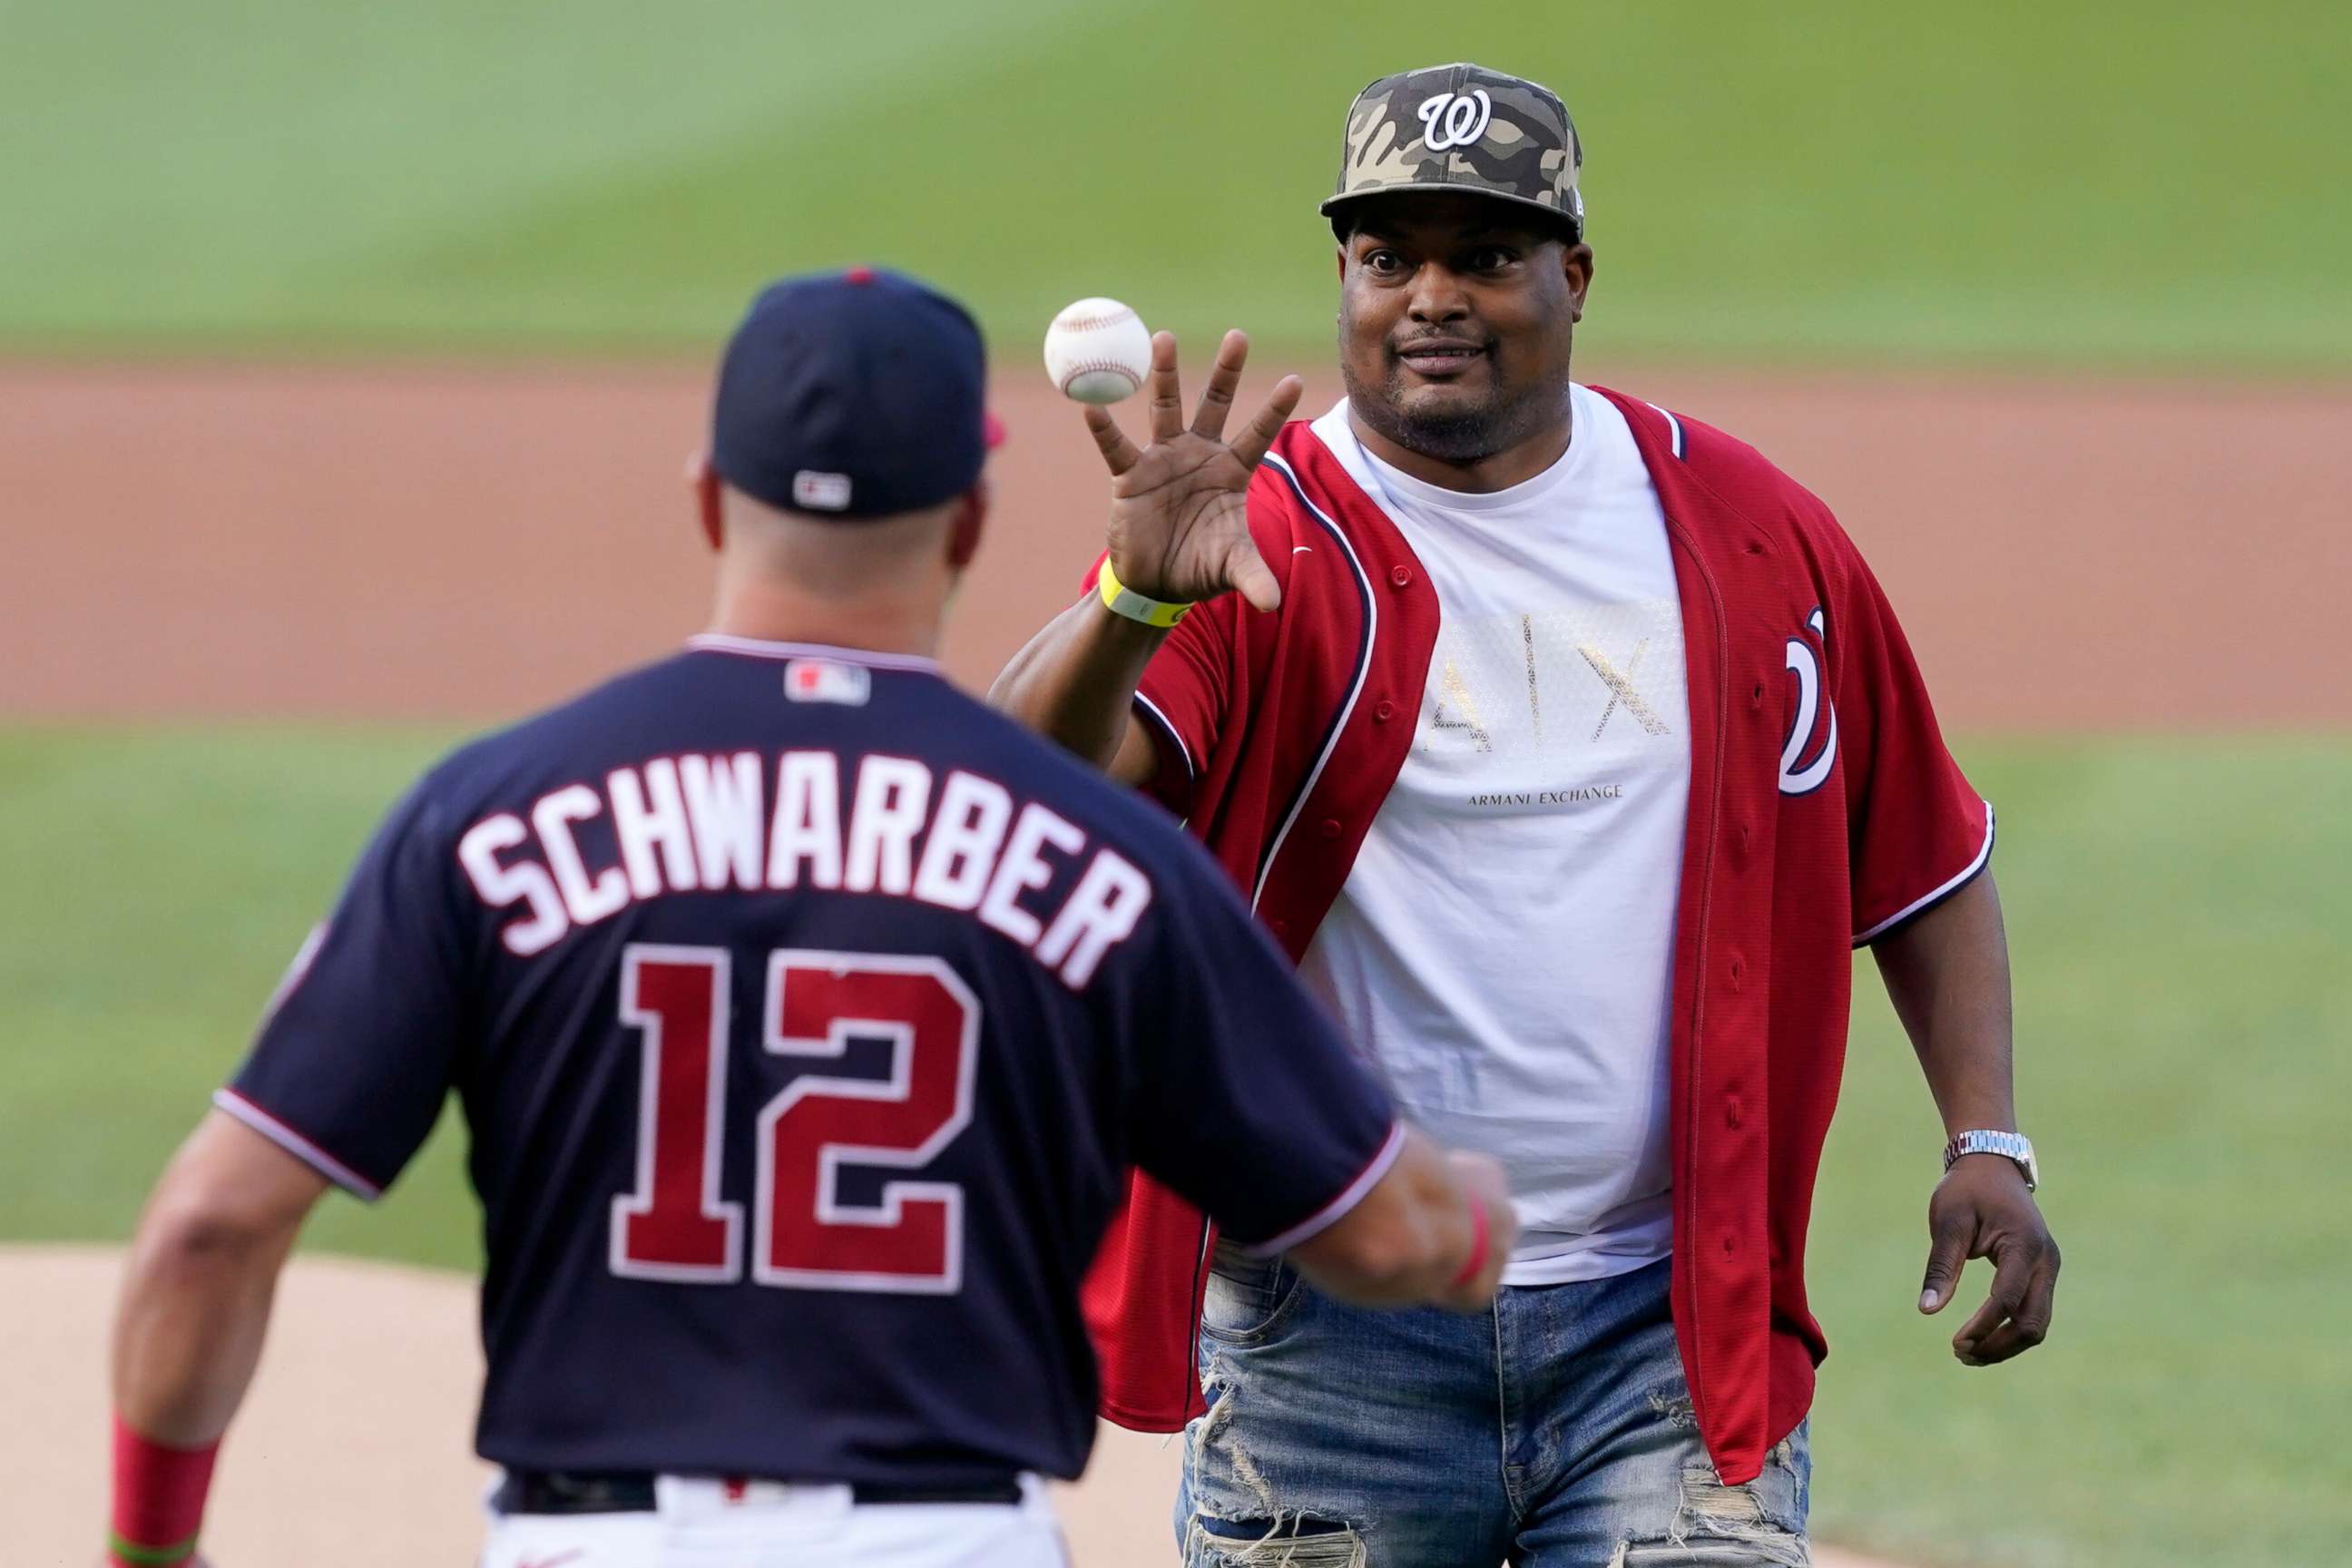 PHOTO: U.S. Capitol Police officer Eugene Goodman catches the ball from Washington Nationals' Kyle Schwarber after throwing out the first pitch before the Washington Nationals baseball game against the New York Mets, Friday, June 18, 2021, in Washington.